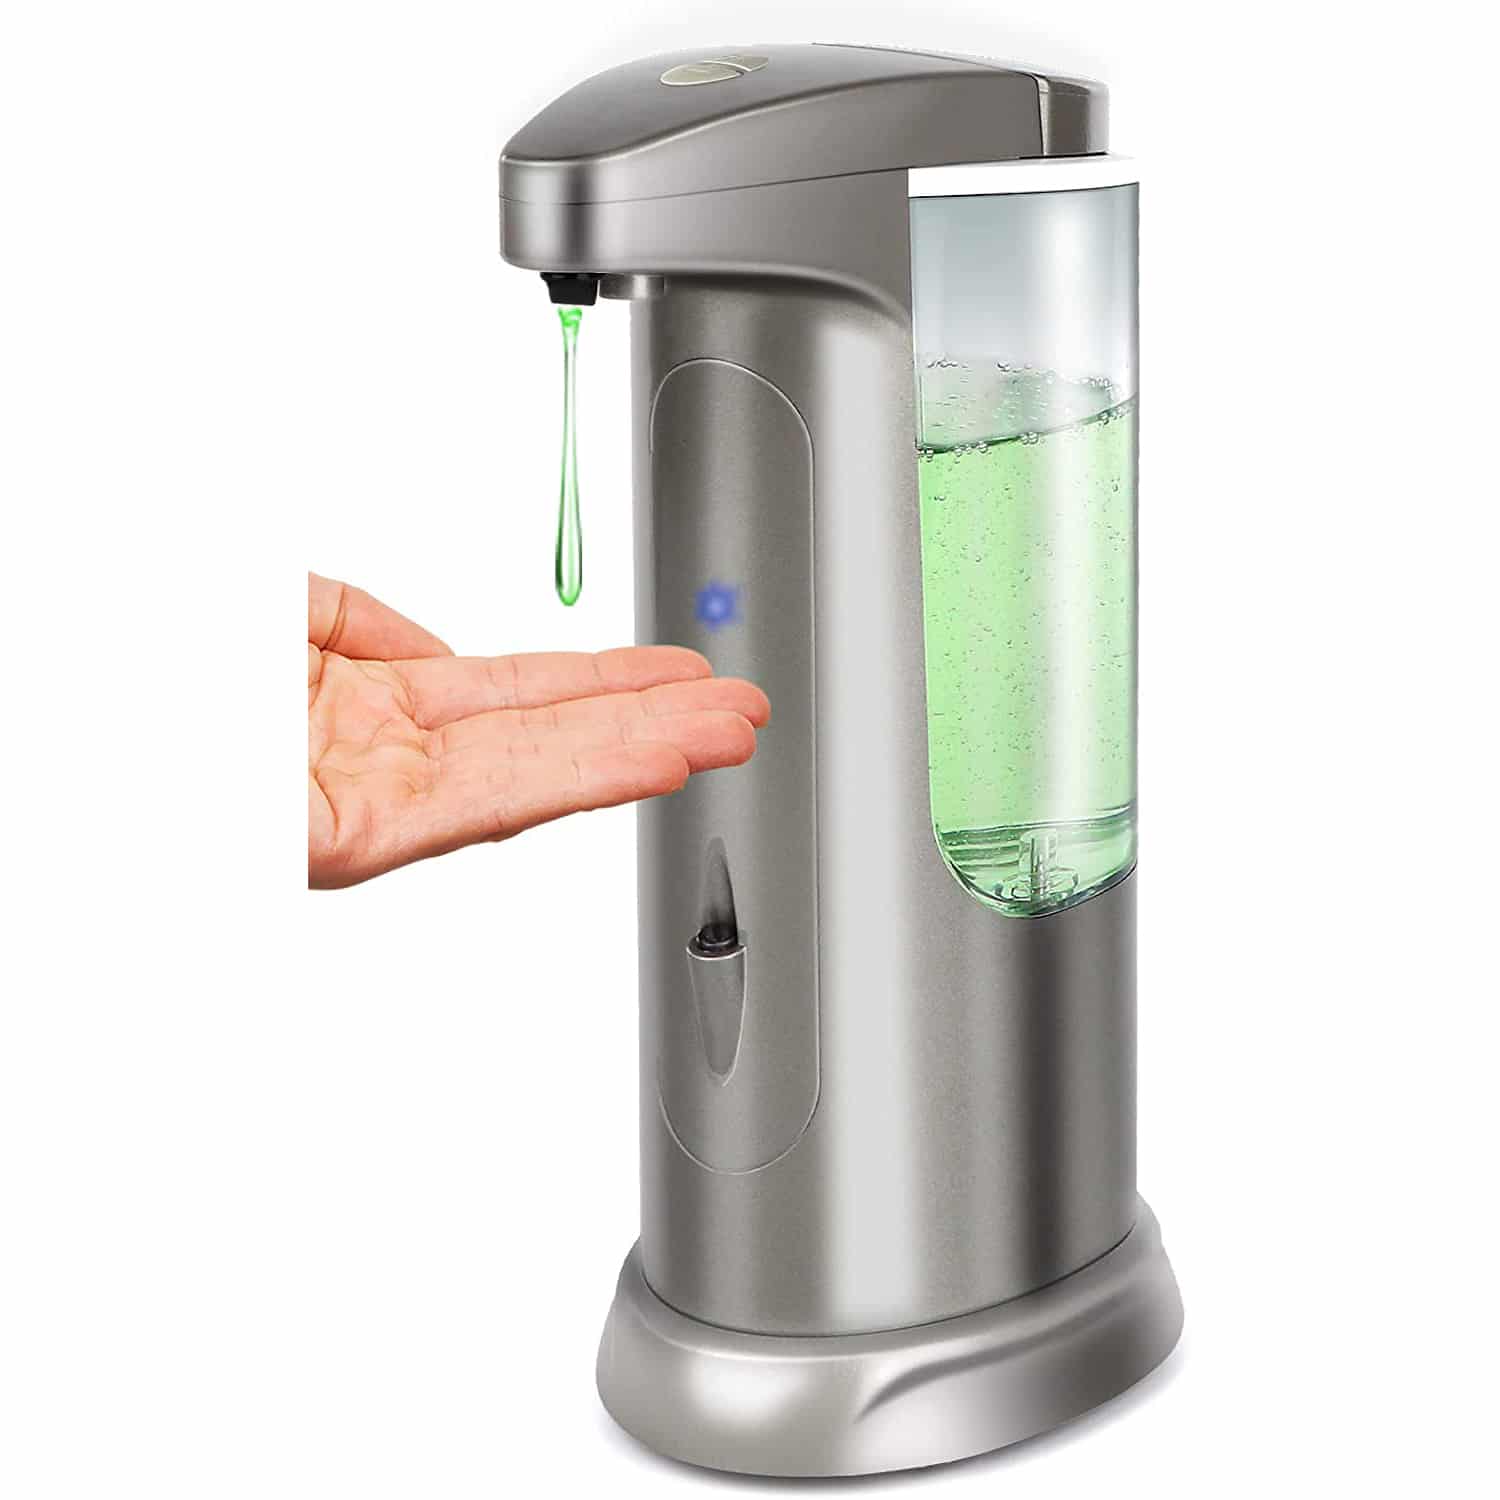 Top 10 Best Automatic Soap Dispensers in 2021 Reviews Guide